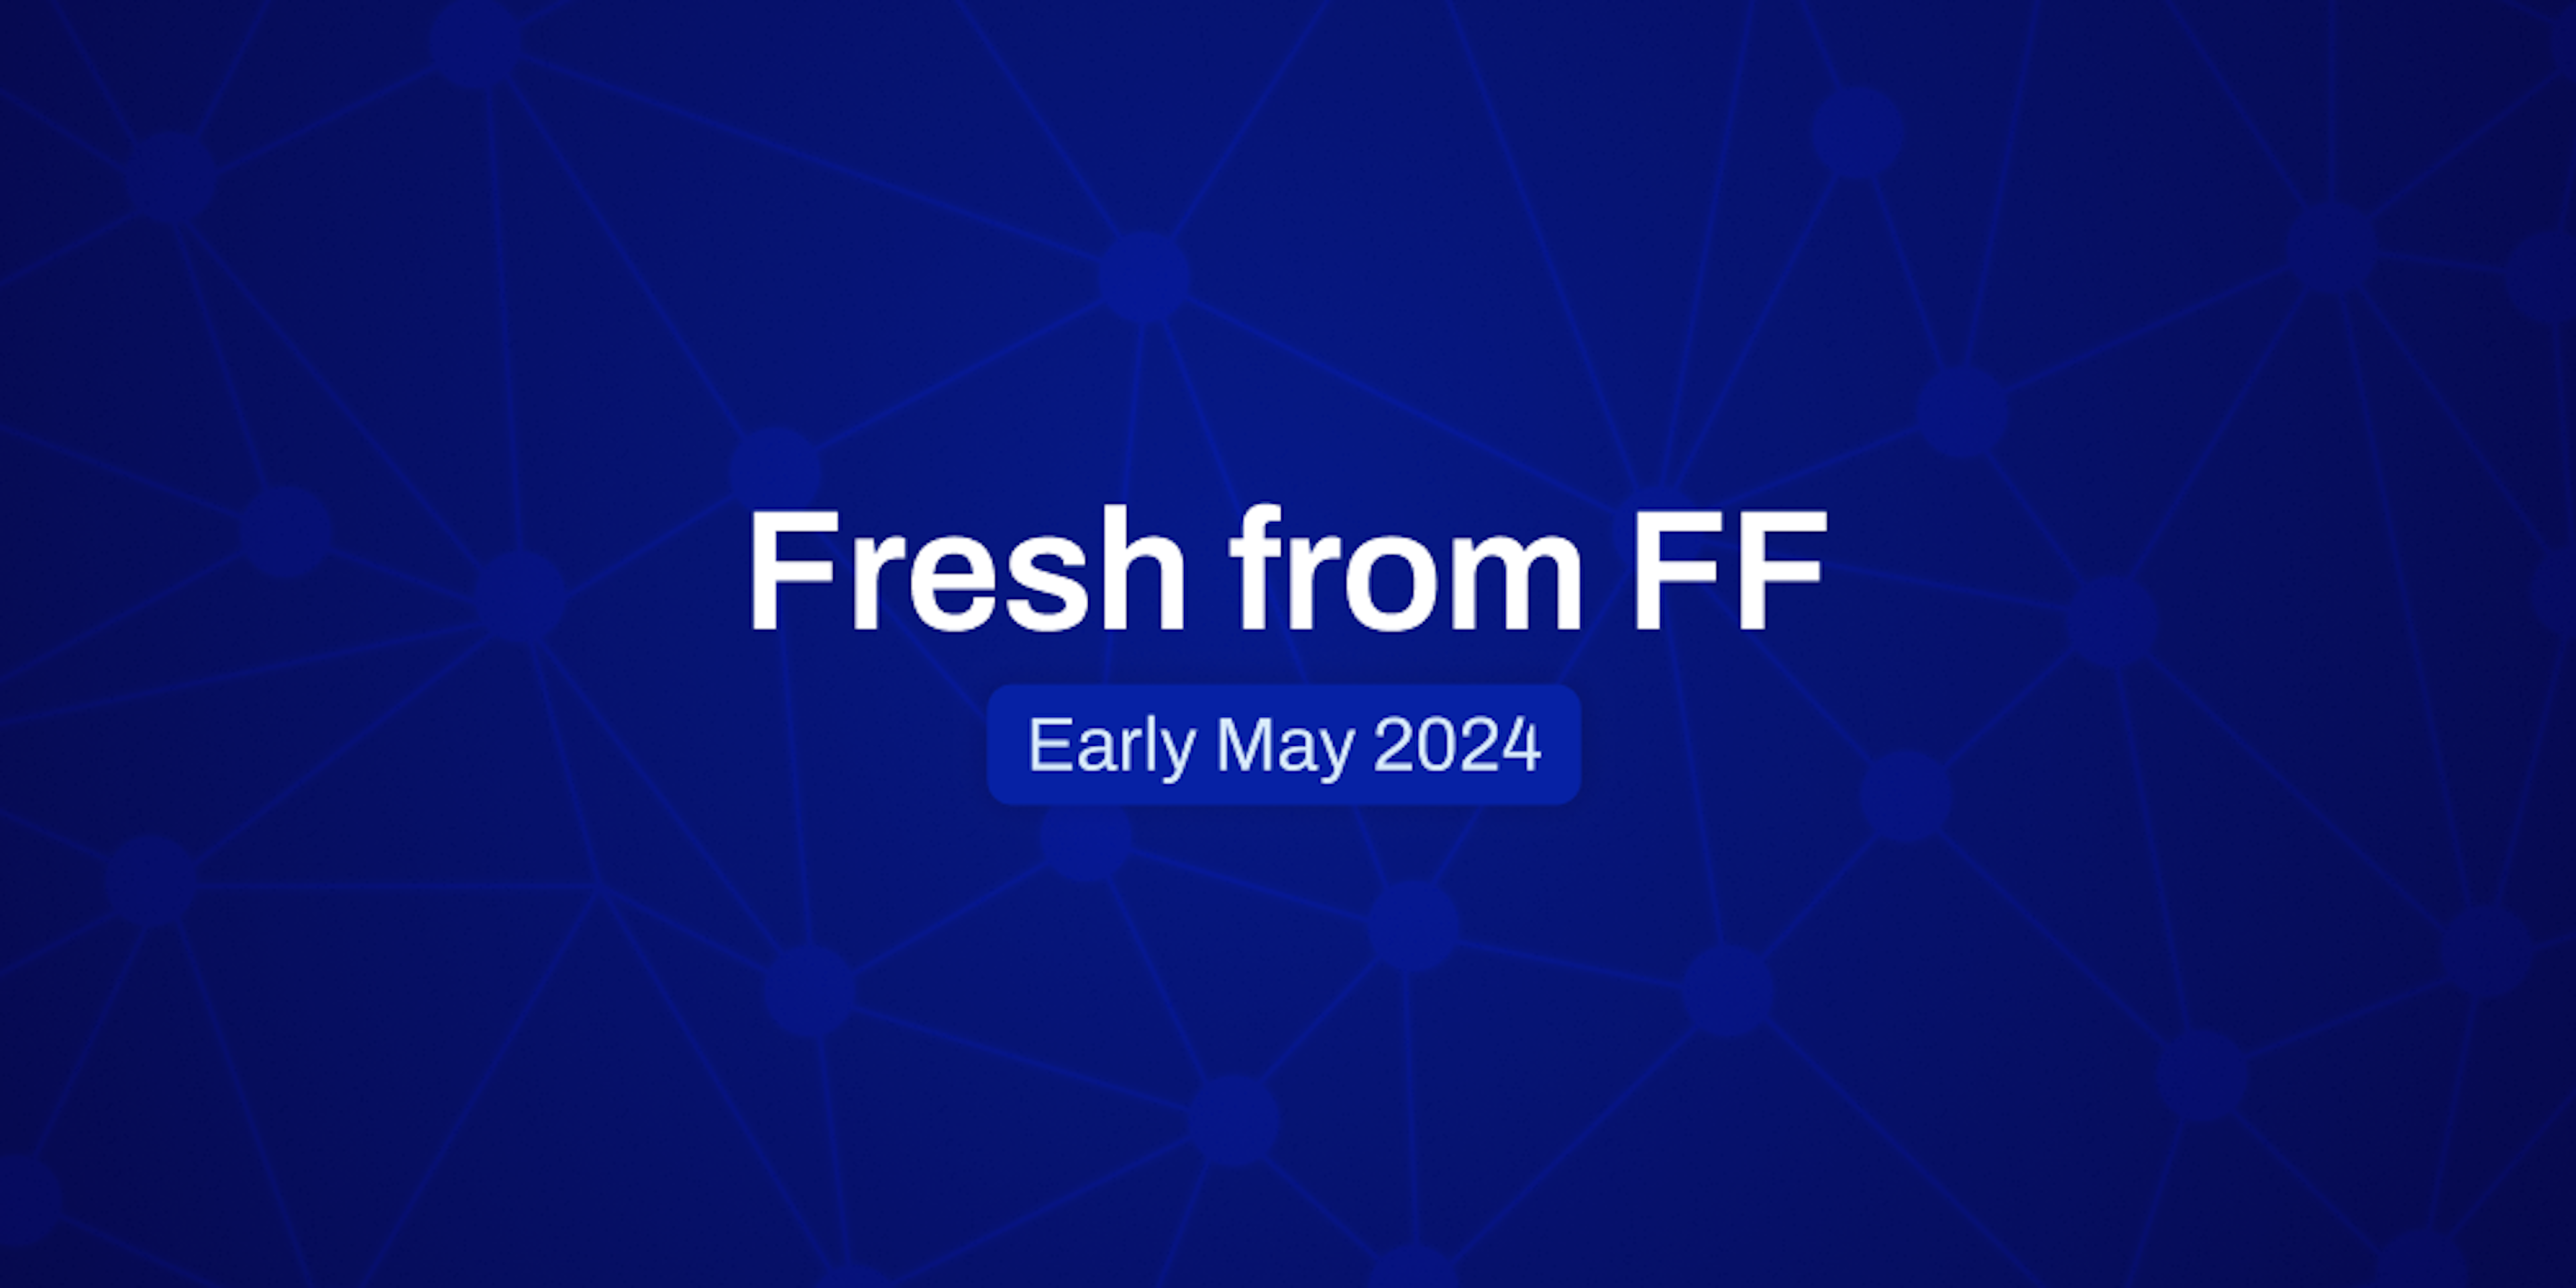 Fresh from FF Early May, 2024